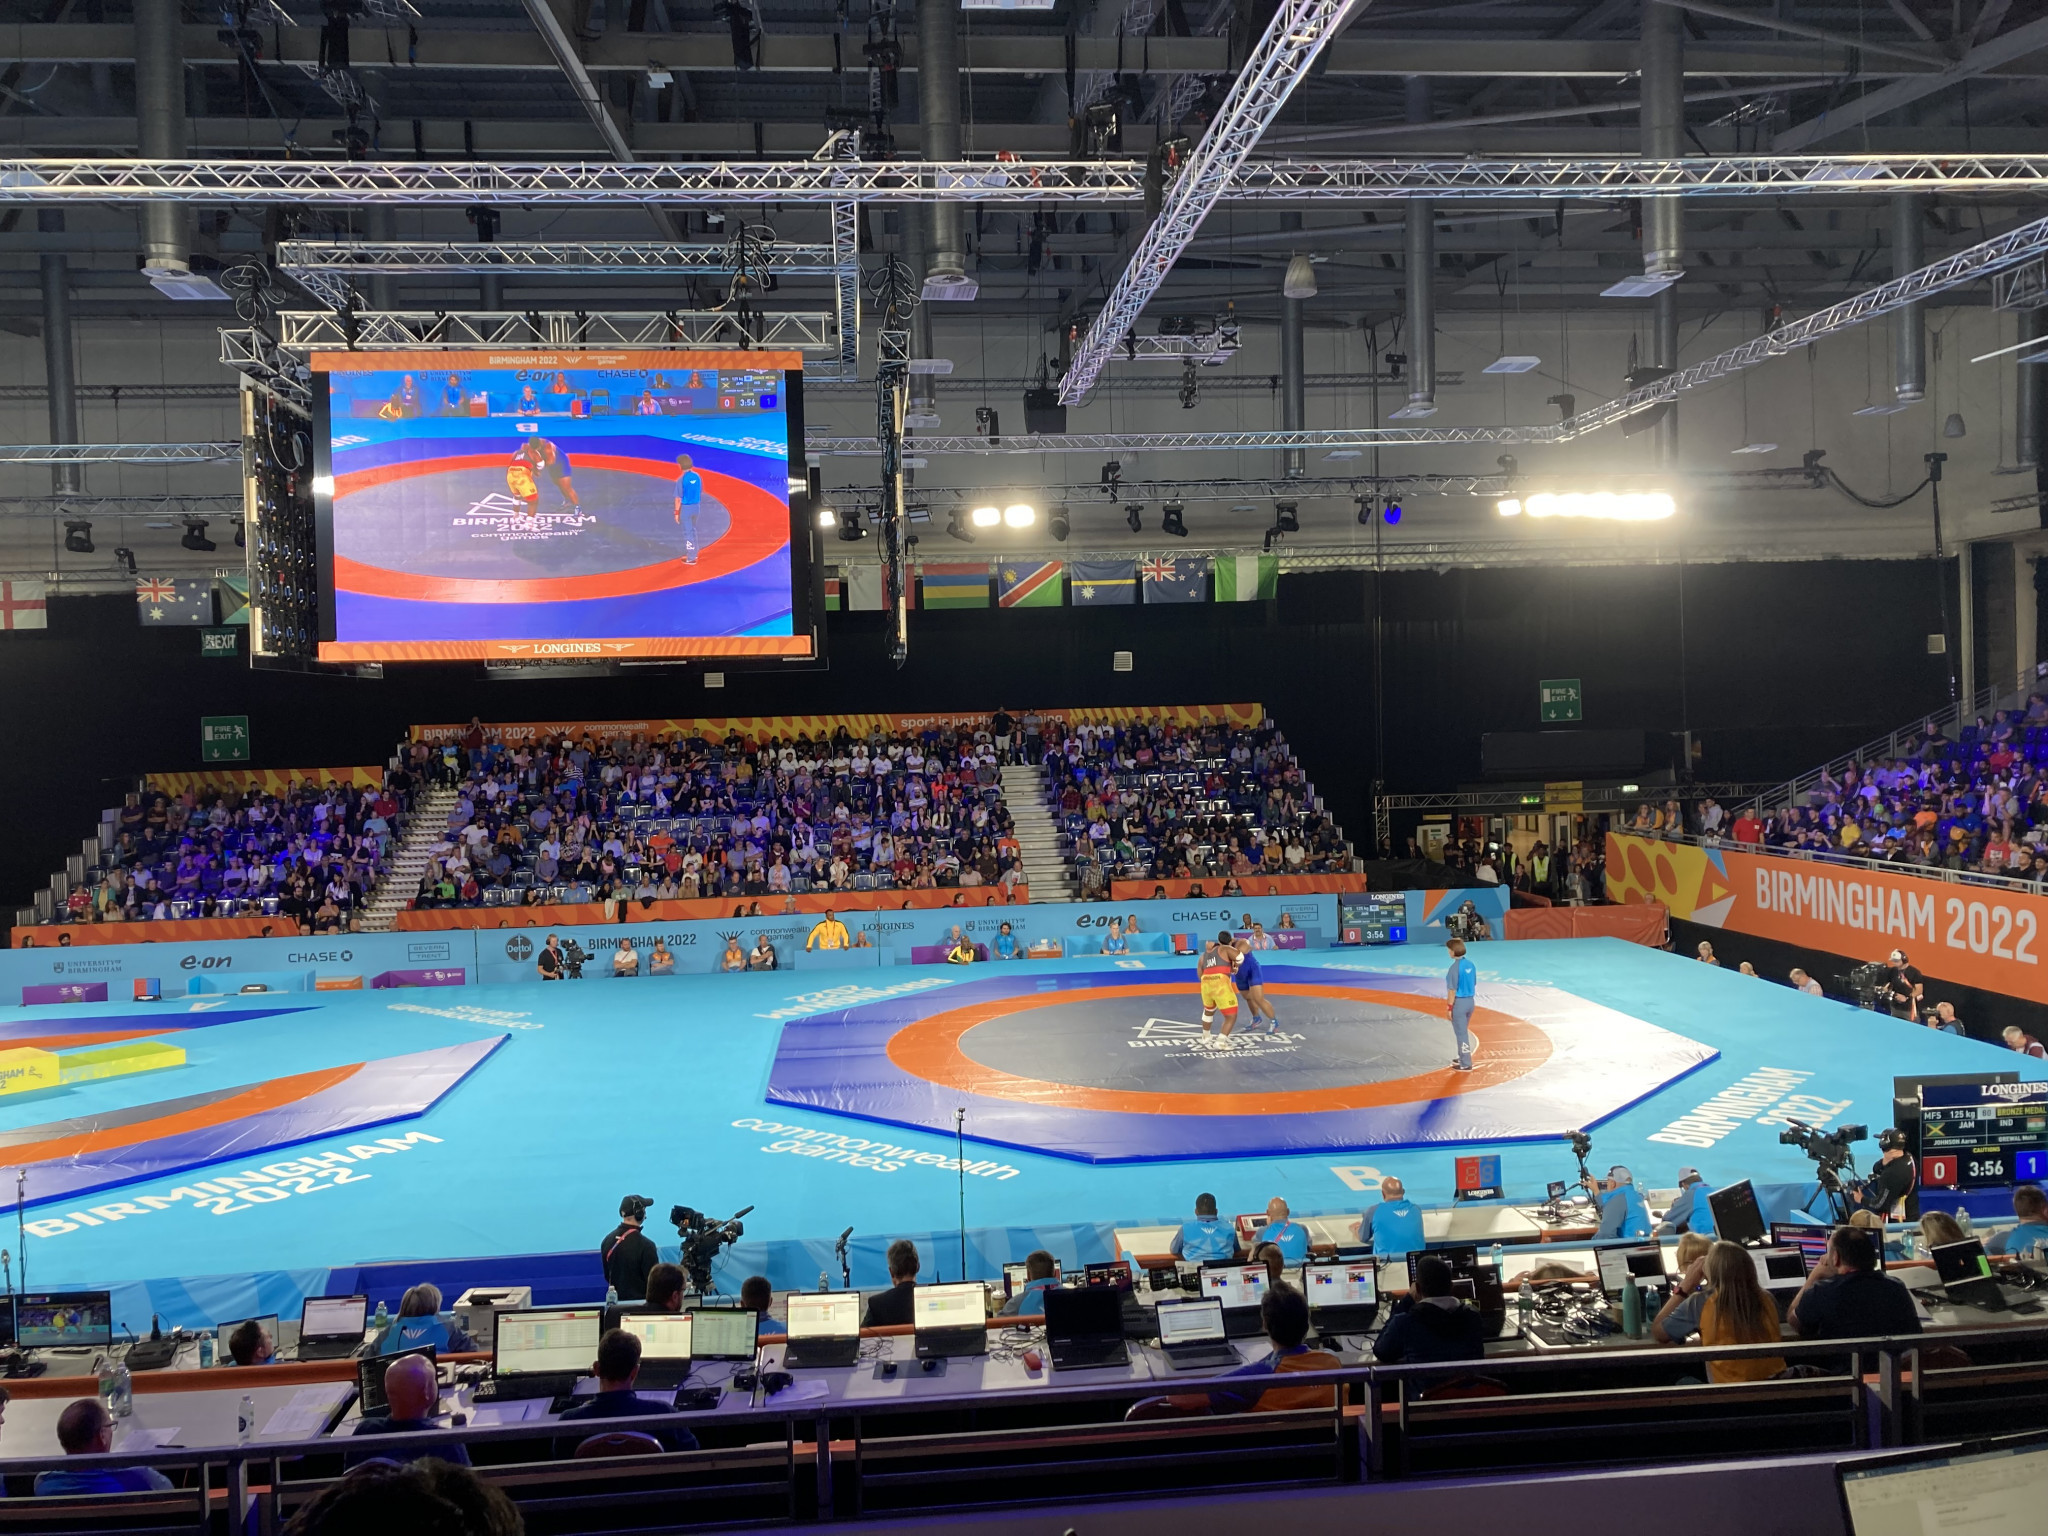 The Coventry Arena held wrestling, judo and rugby sevens at the Commonwealth Games ©Getty Images